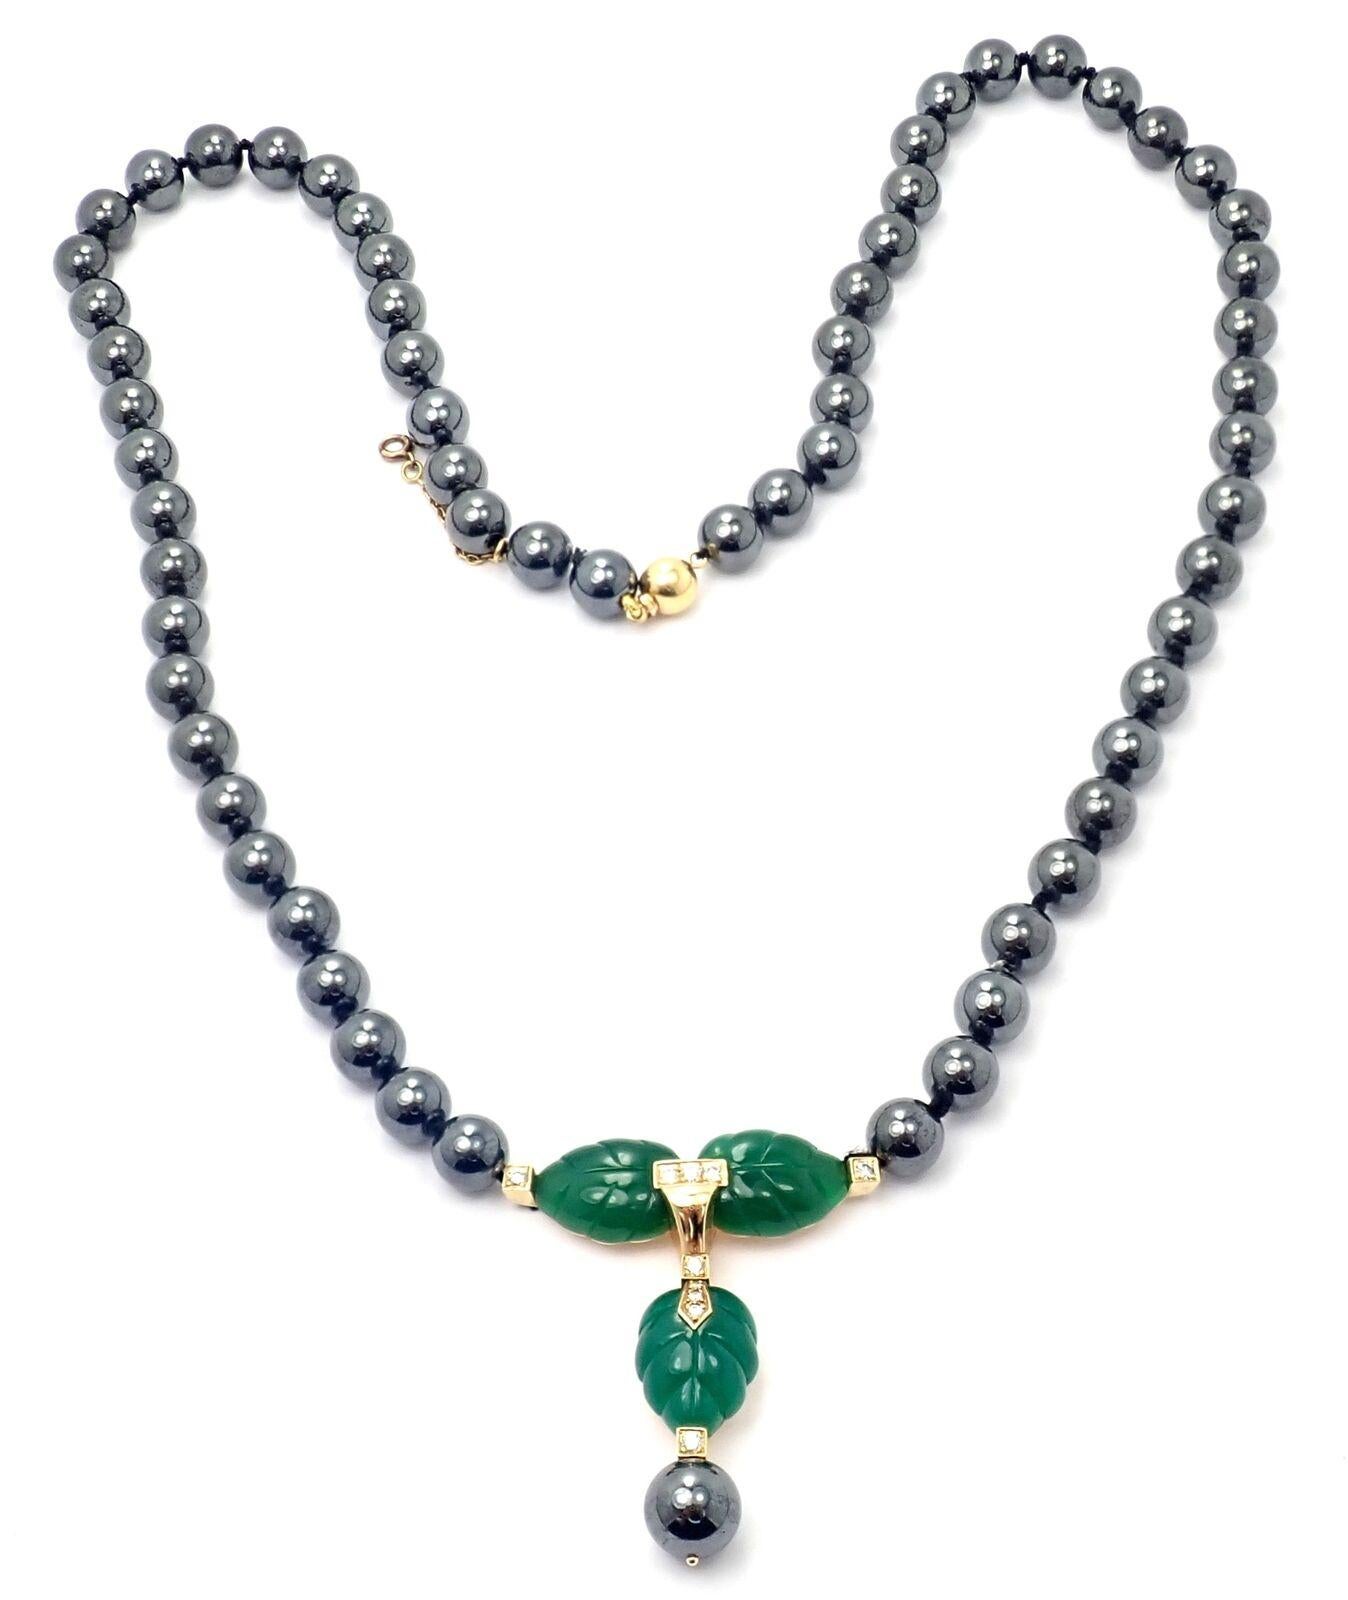 18k Yellow Gold Diamond Hematite Bead Chalcedony Leaf Design Stones Necklace by Cartier. 
With 1 strand of Hematite beads
Each approx 9mm in size
10 round brilliant cut diamonds VS1 clarity, E color total weight approximately .50ct
3 Green